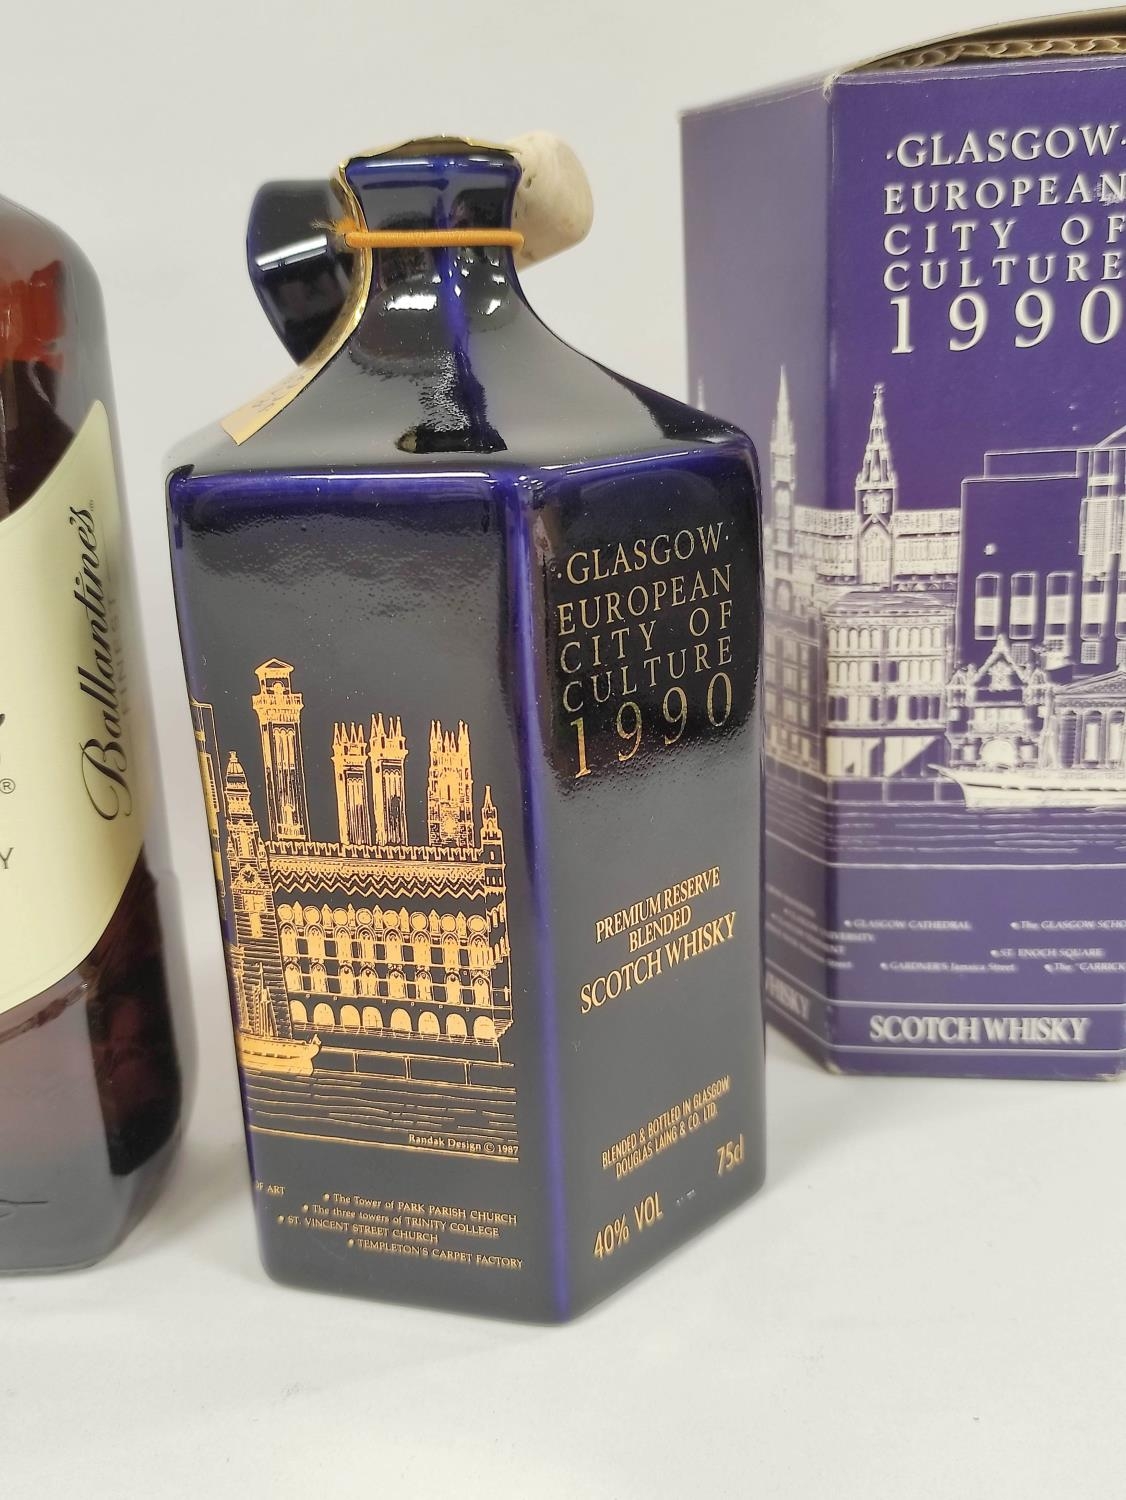 Glasgow European City of Culture 1990 premium reserve blended Scotch whisky, Blended & bottled in - Image 2 of 5